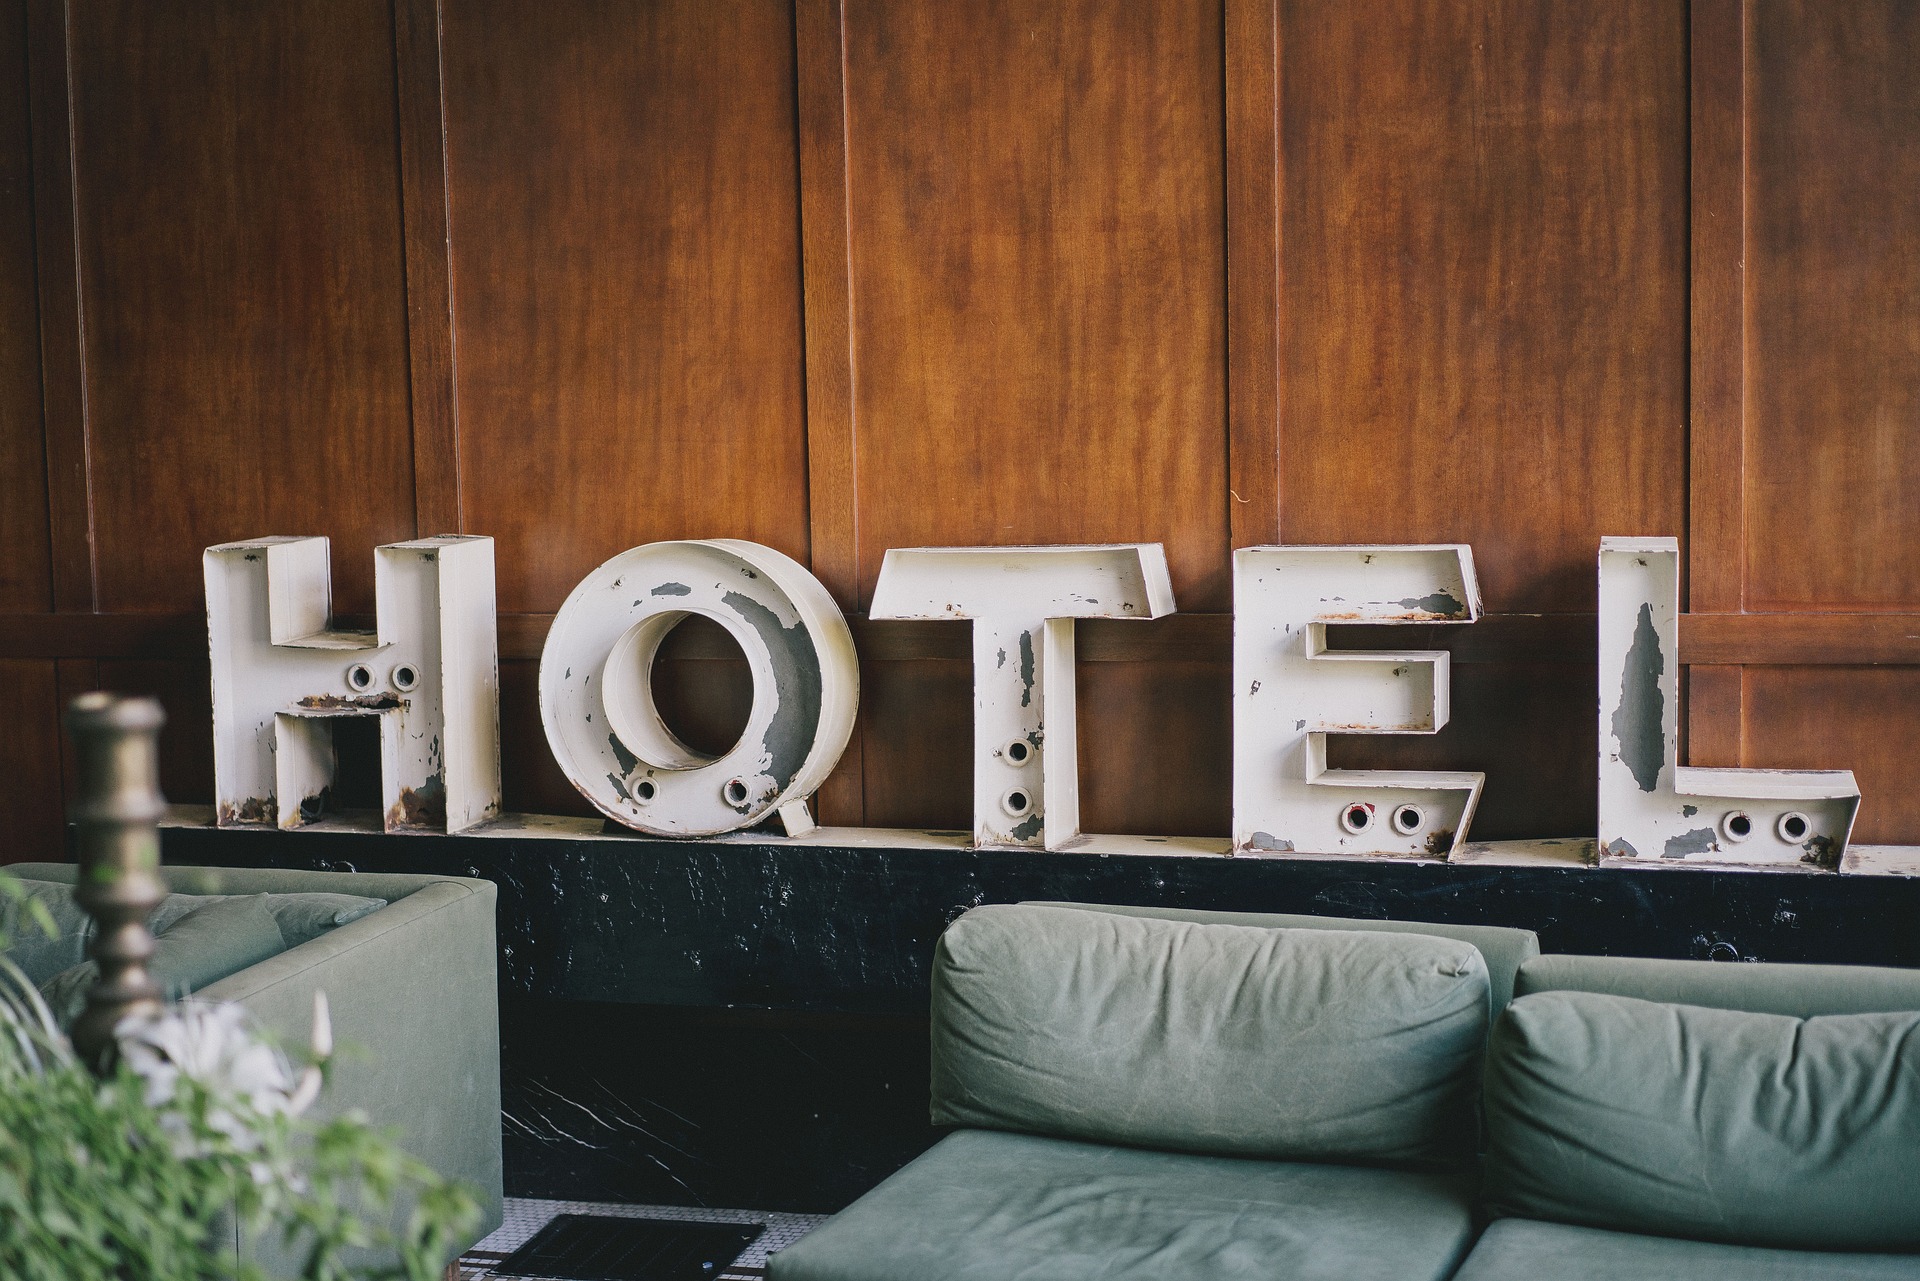 Metallic letters arranged to spell out the word Hotel.